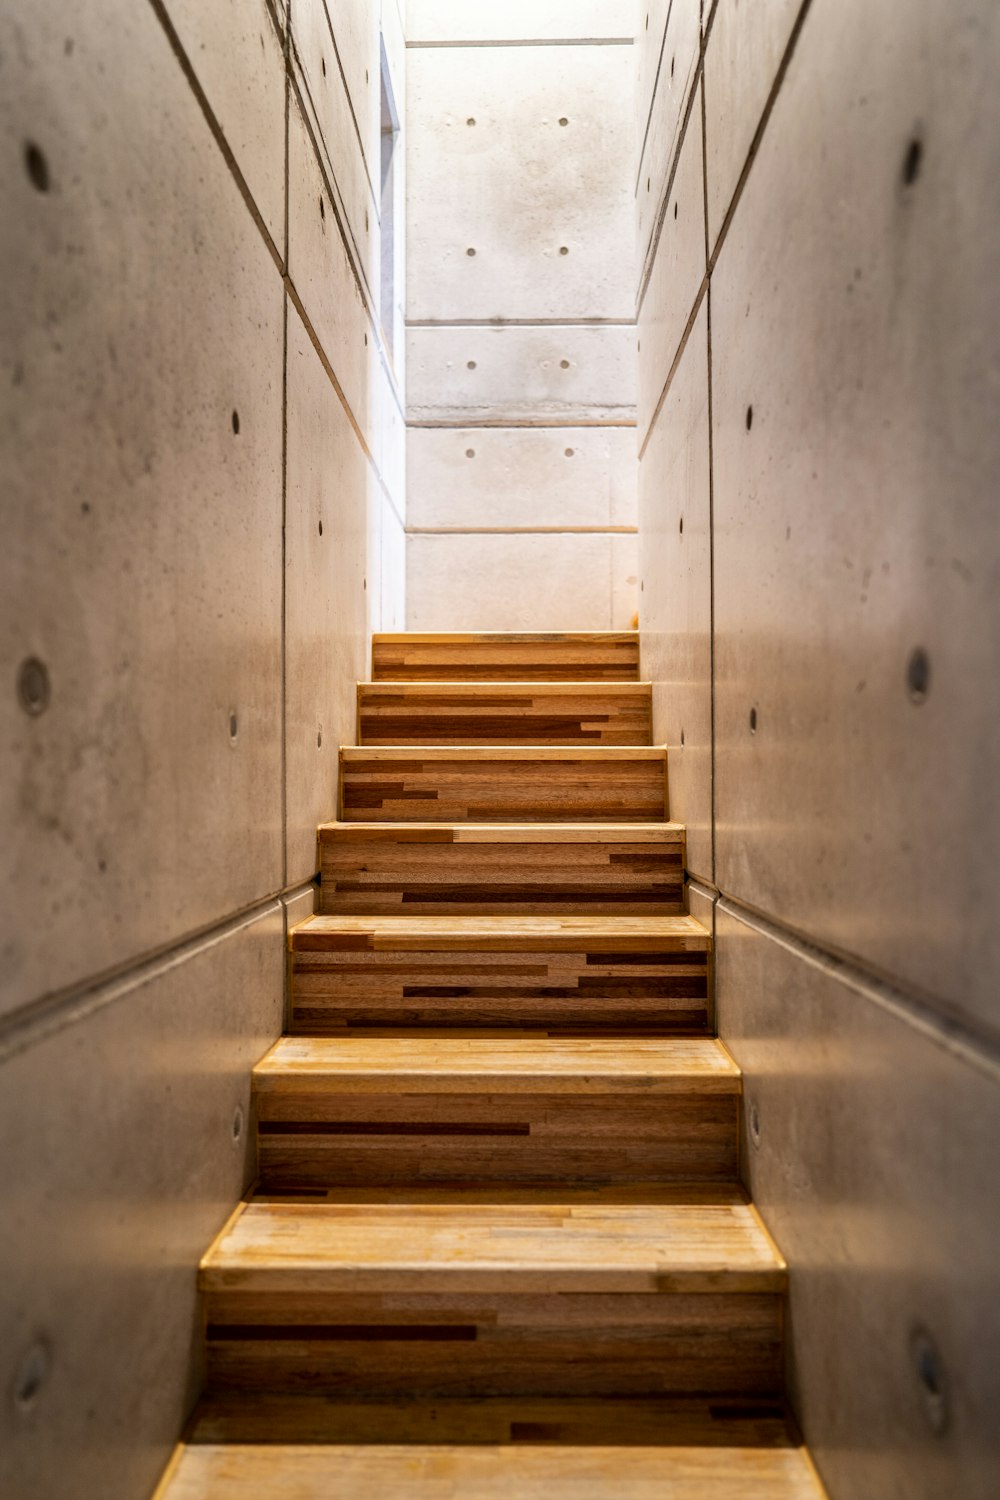 a wooden staircase in a building